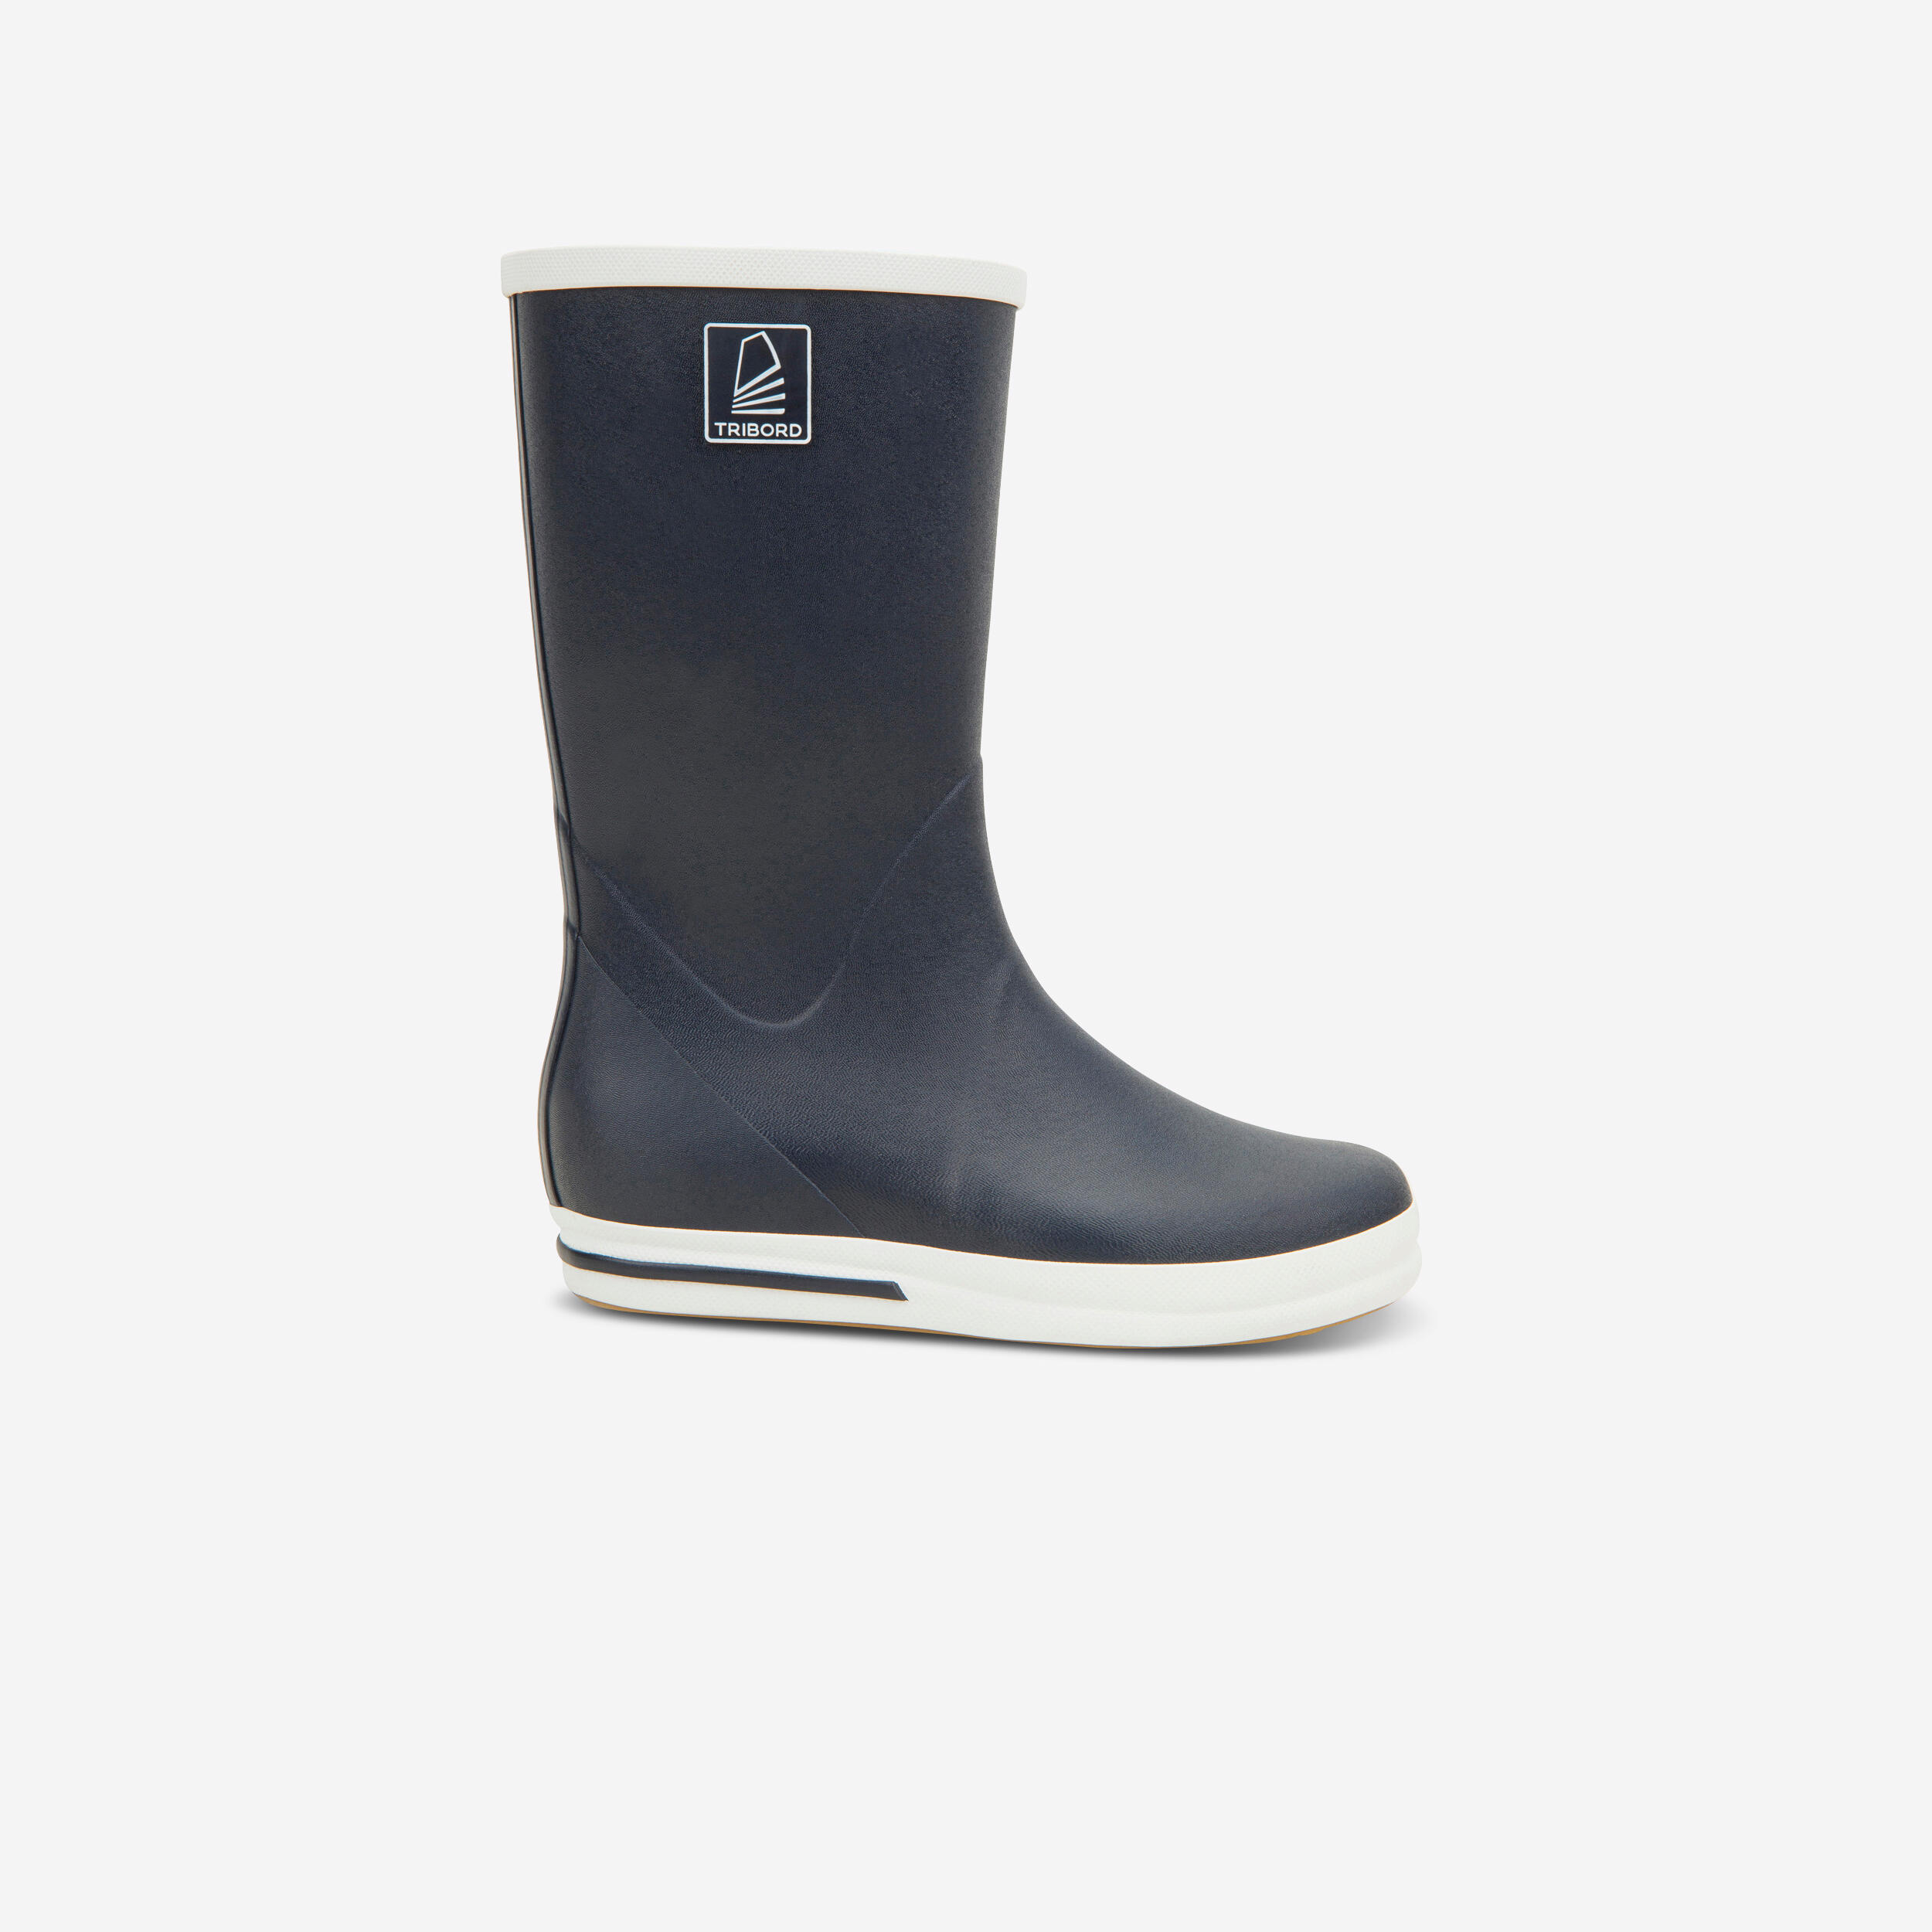 Sailing boots, rubber rain boots - 500 Adults' Navy 6/11